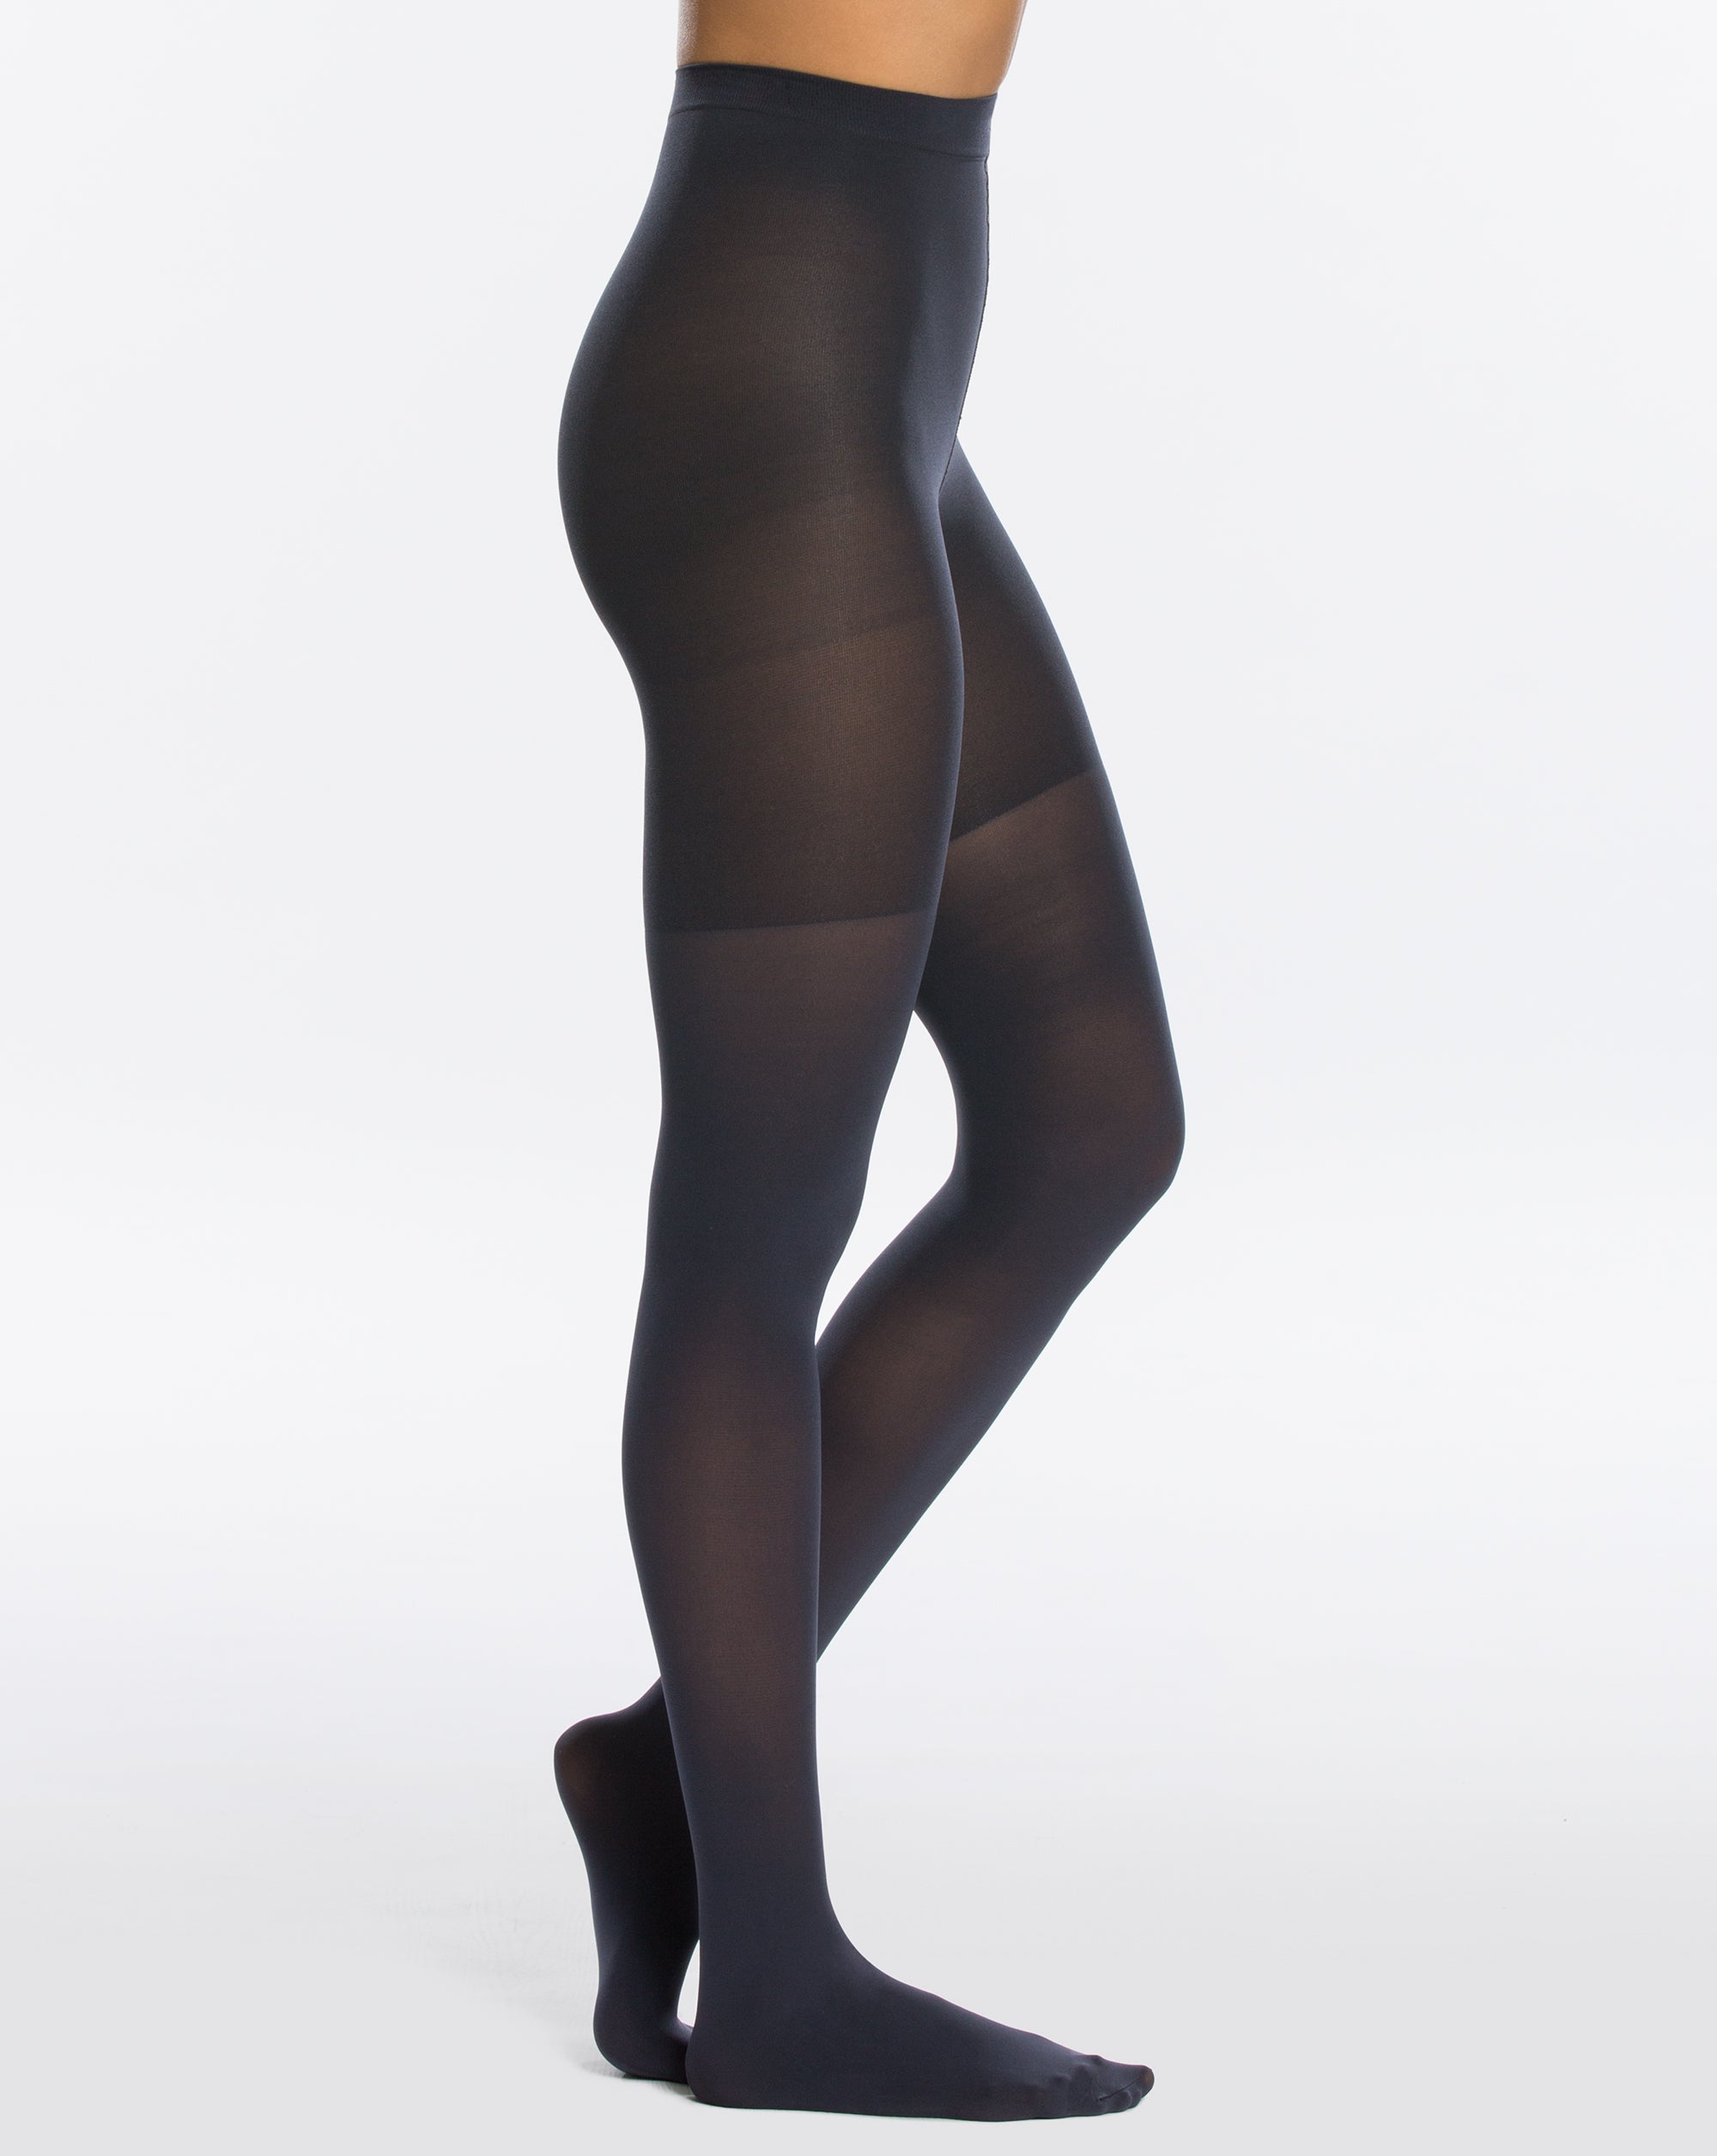 Spanx Tight-End-Tights Heathered Contrast 2446-Black/Gray-A